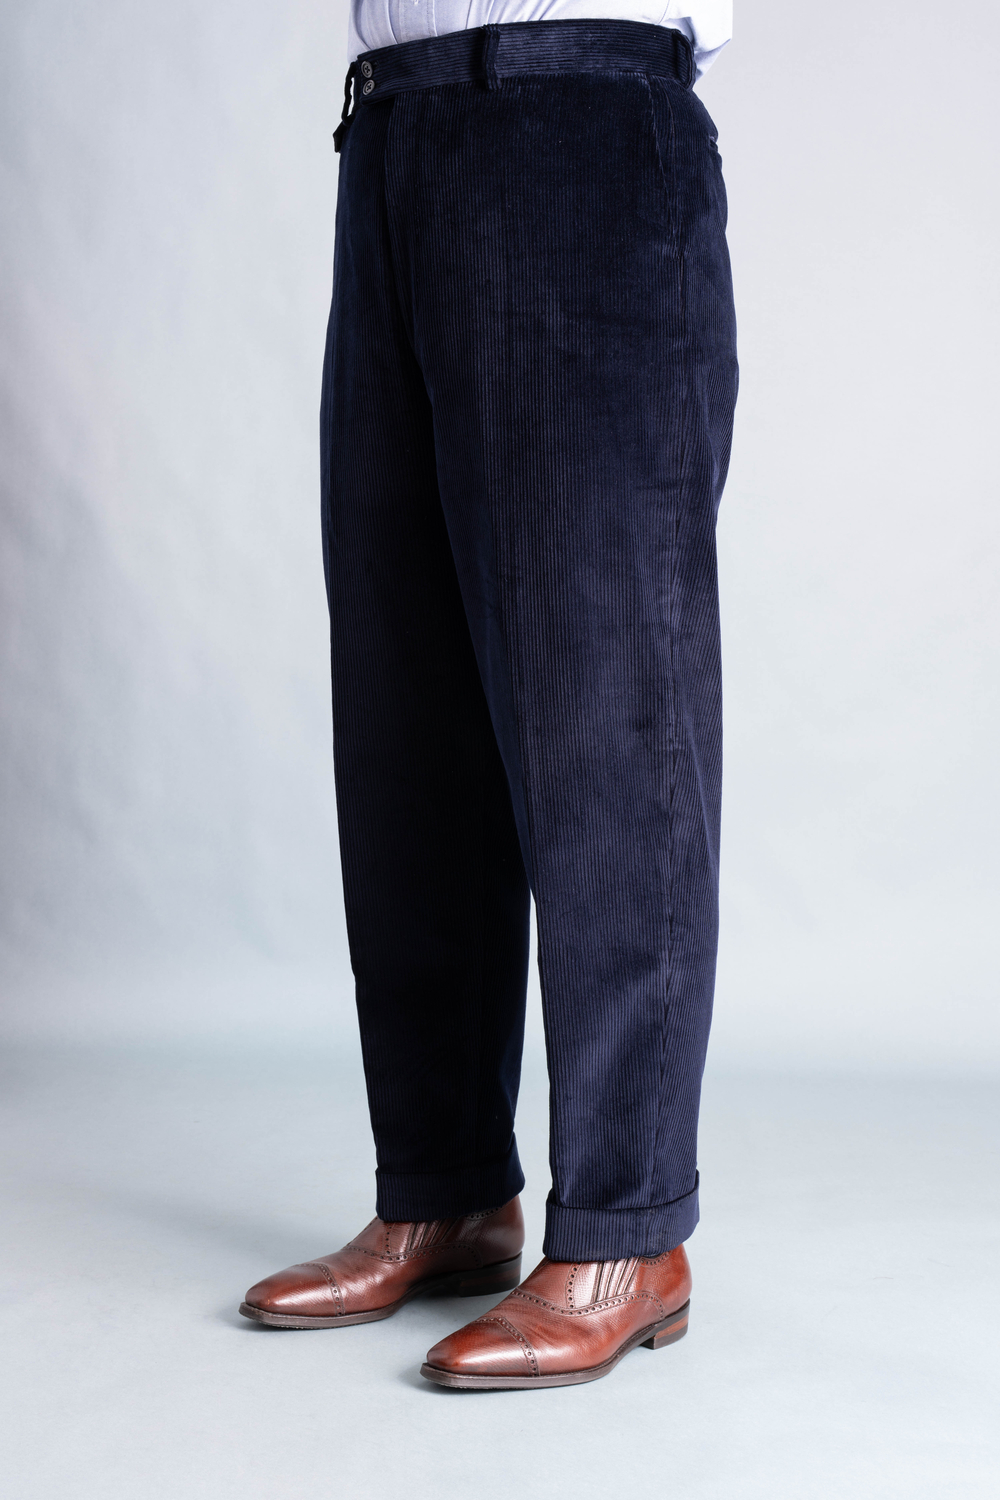 Midnight Blue Corduroy Trousers -Stancliffe Flat-Front in 8-Wale